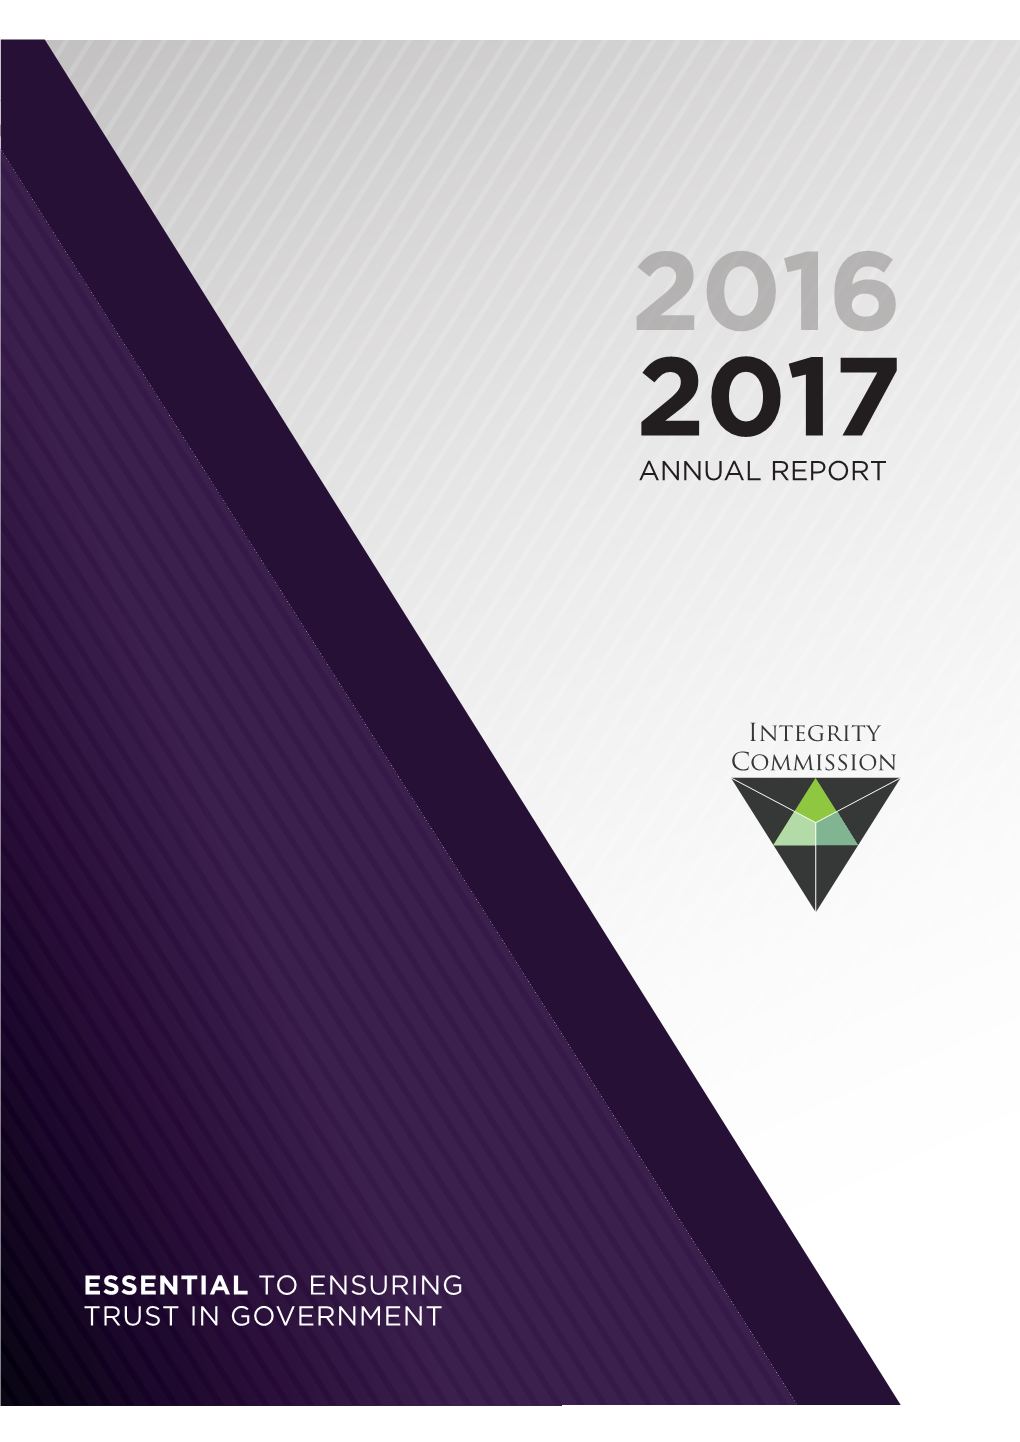 Integrity Commission Annual Report 2016-17